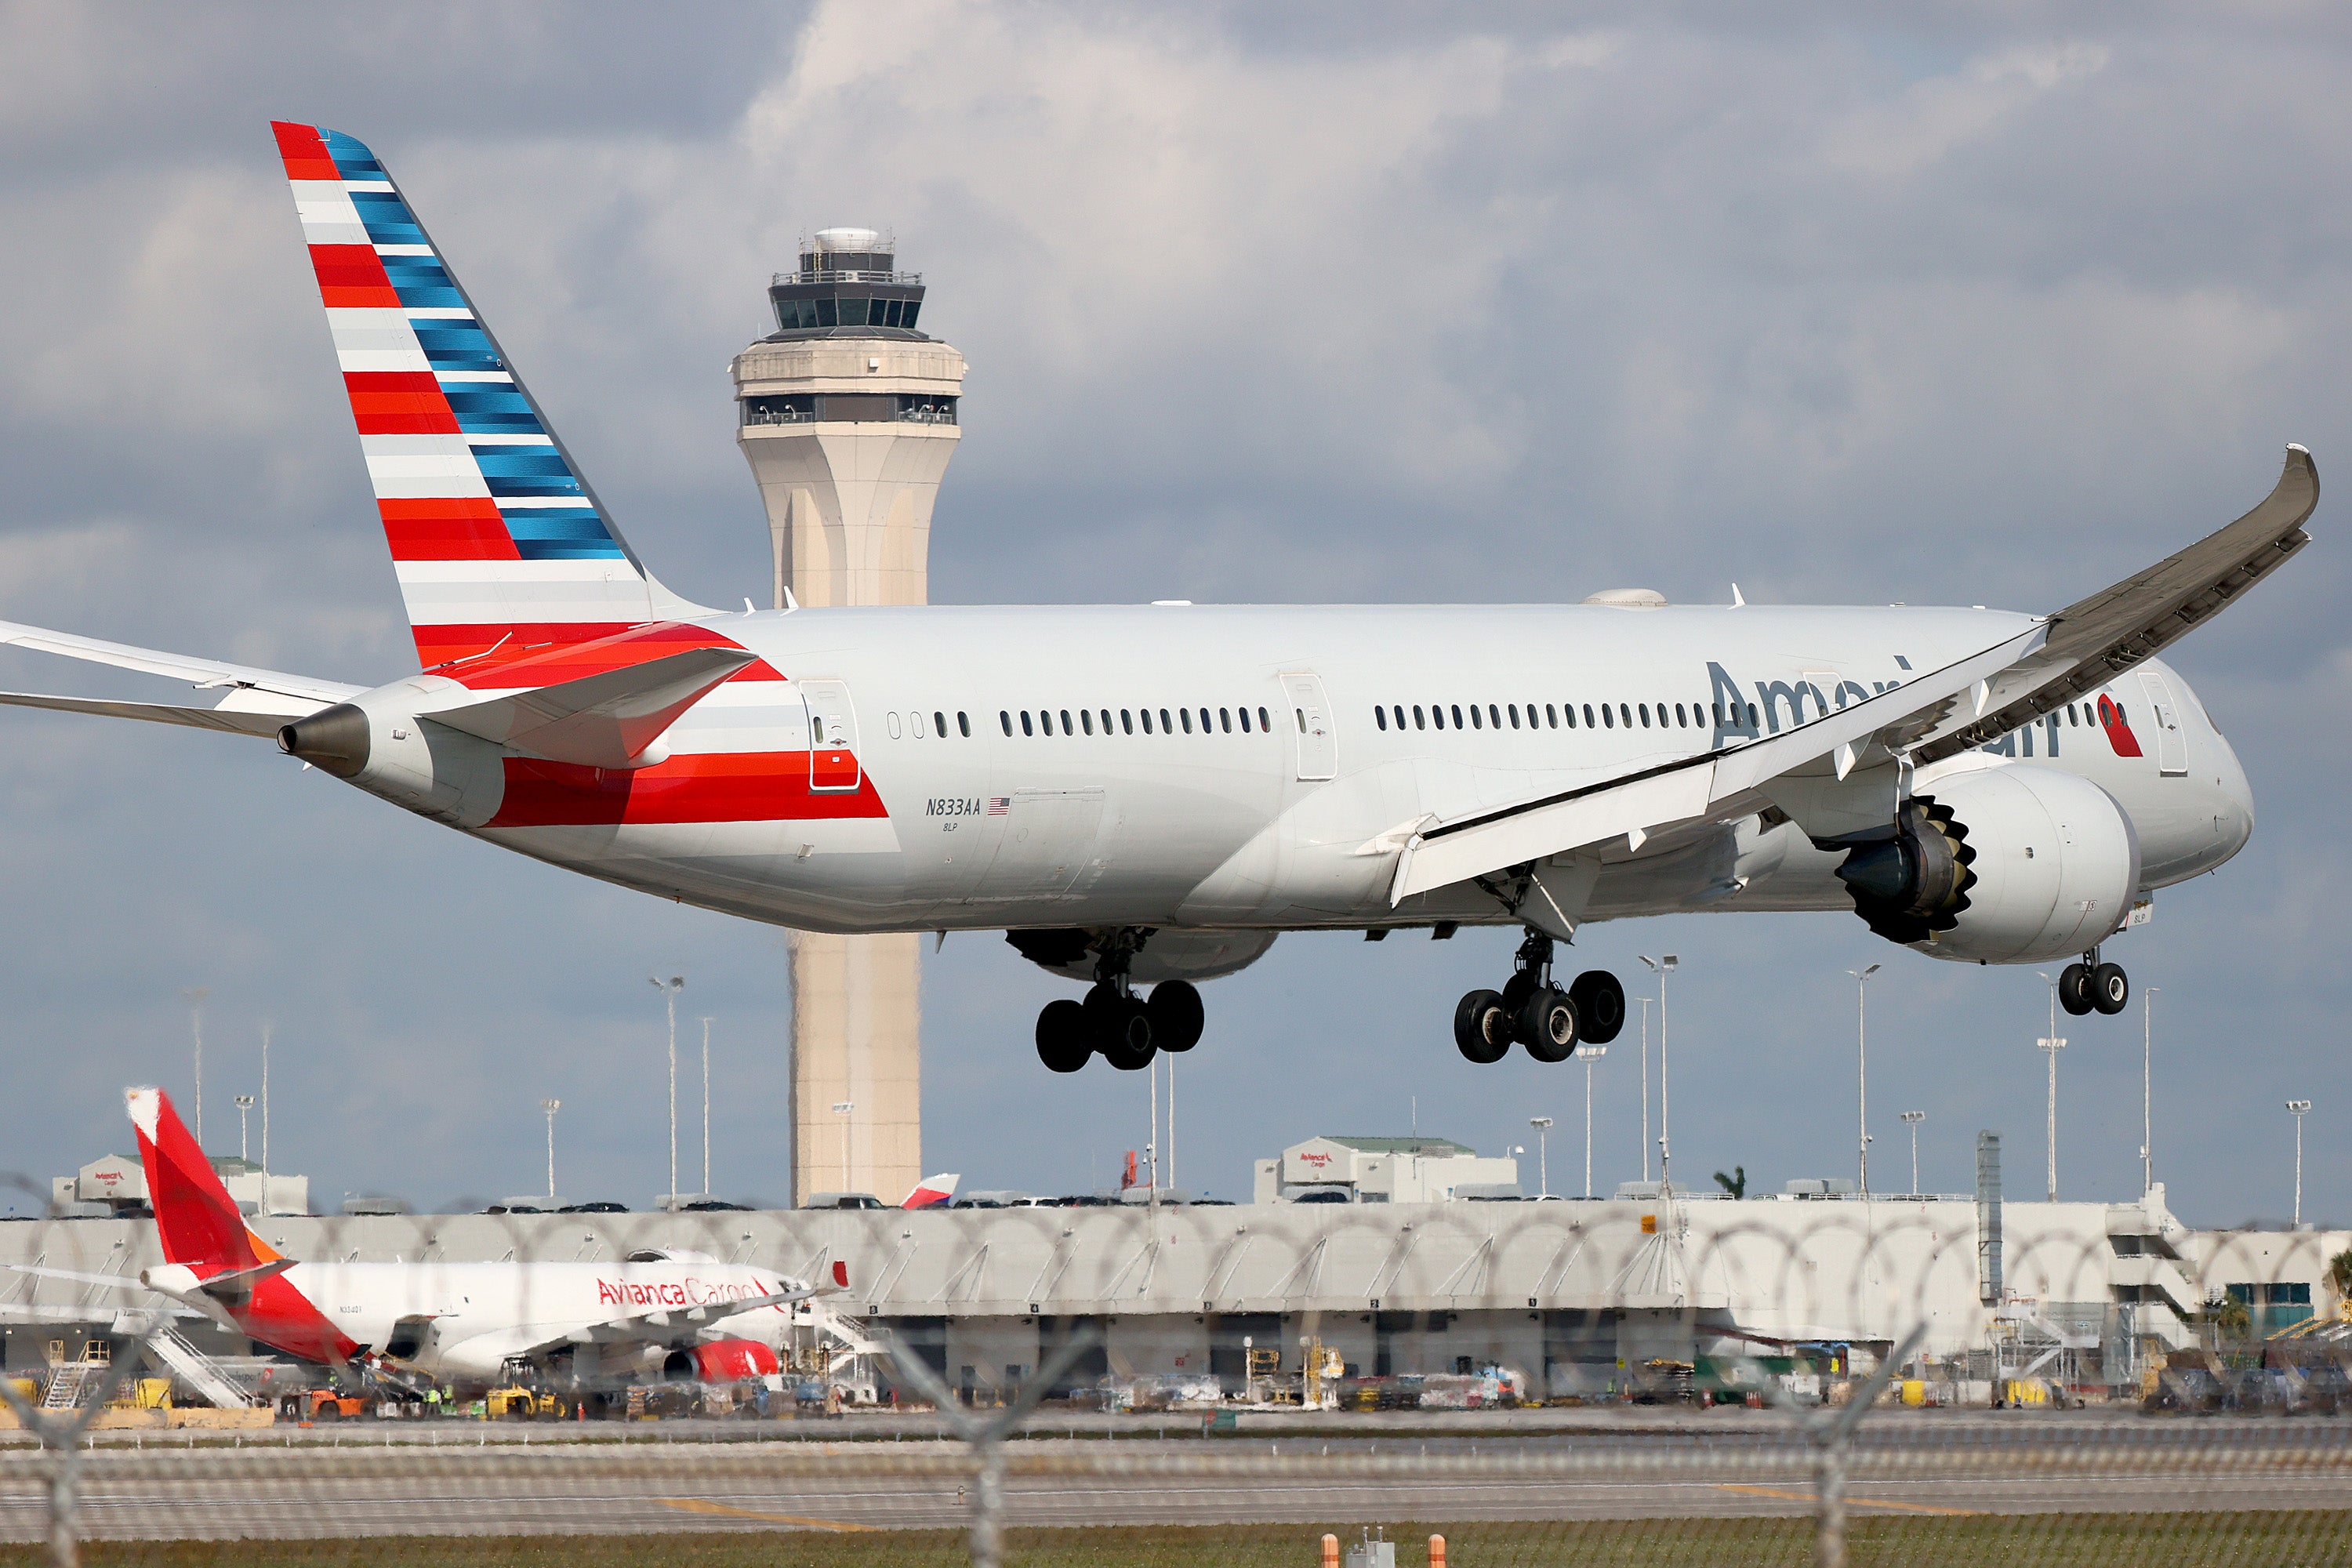 An American Airlines plane at Miami airport [file photo]